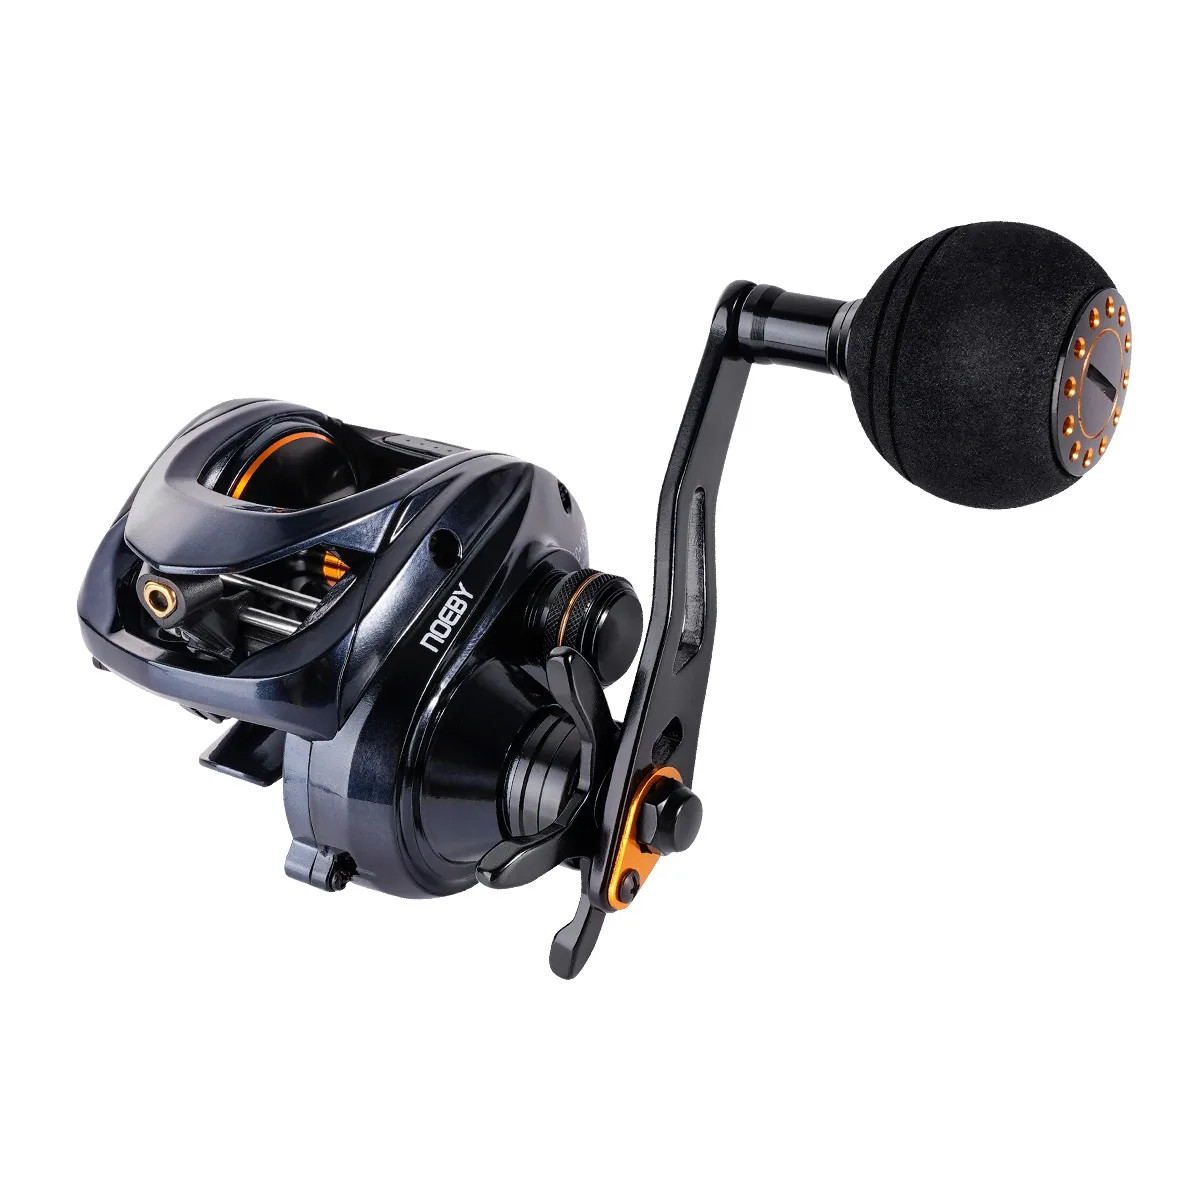 Noeby-Baitcasting Fishing Reel, Large Capacity Brass Gear, Stainless  Aluminum PIke Fishing Reels, 15kg Max Drag Gear Ratio 6.4:1 - AliExpress